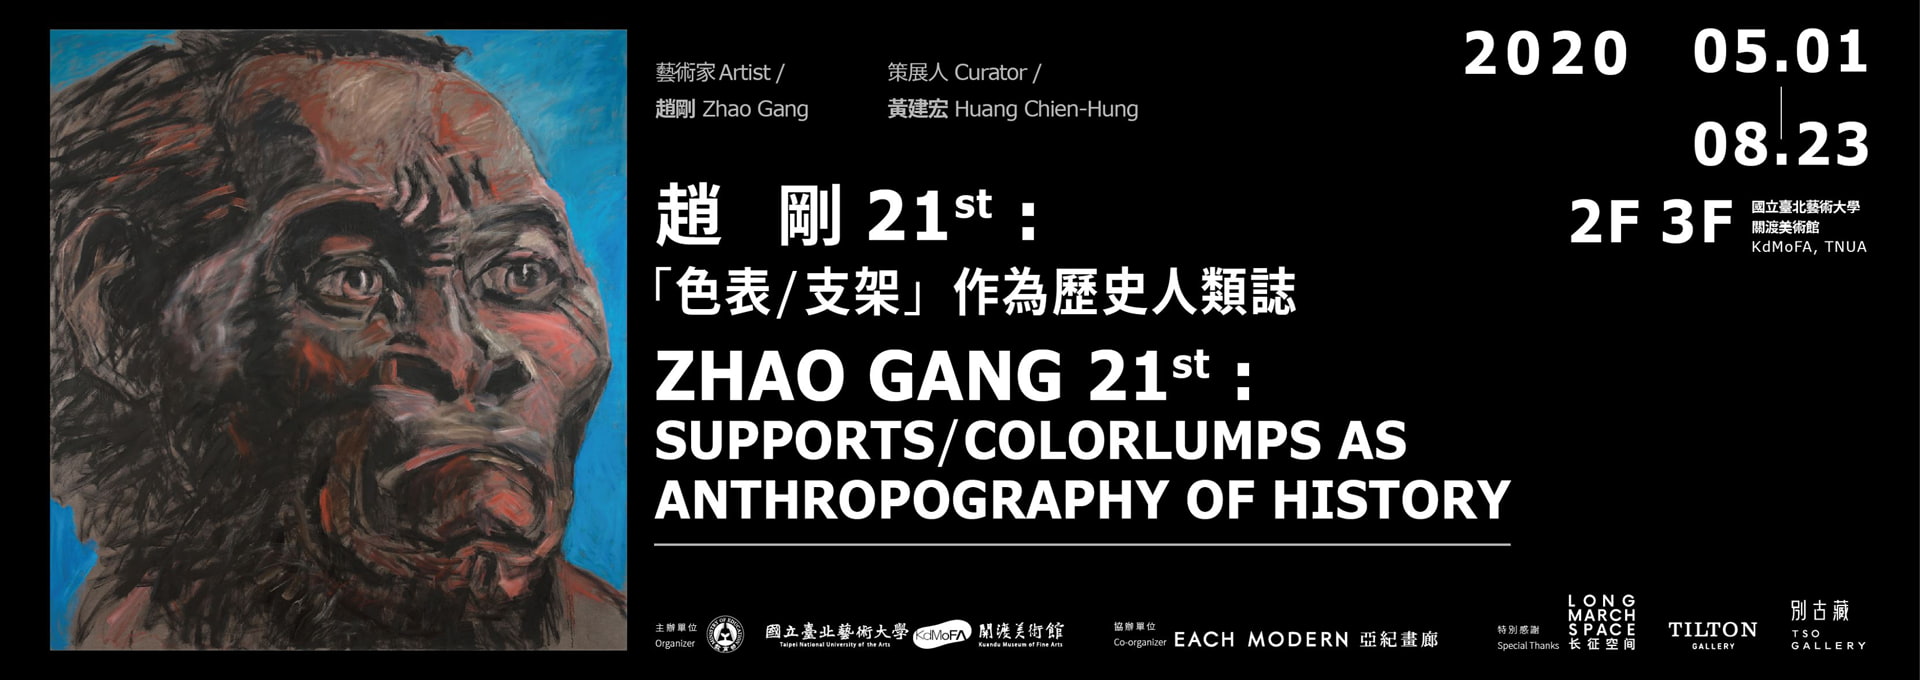 Zhao Gang 21st : Supports /ColorLumps as Anthropography of History